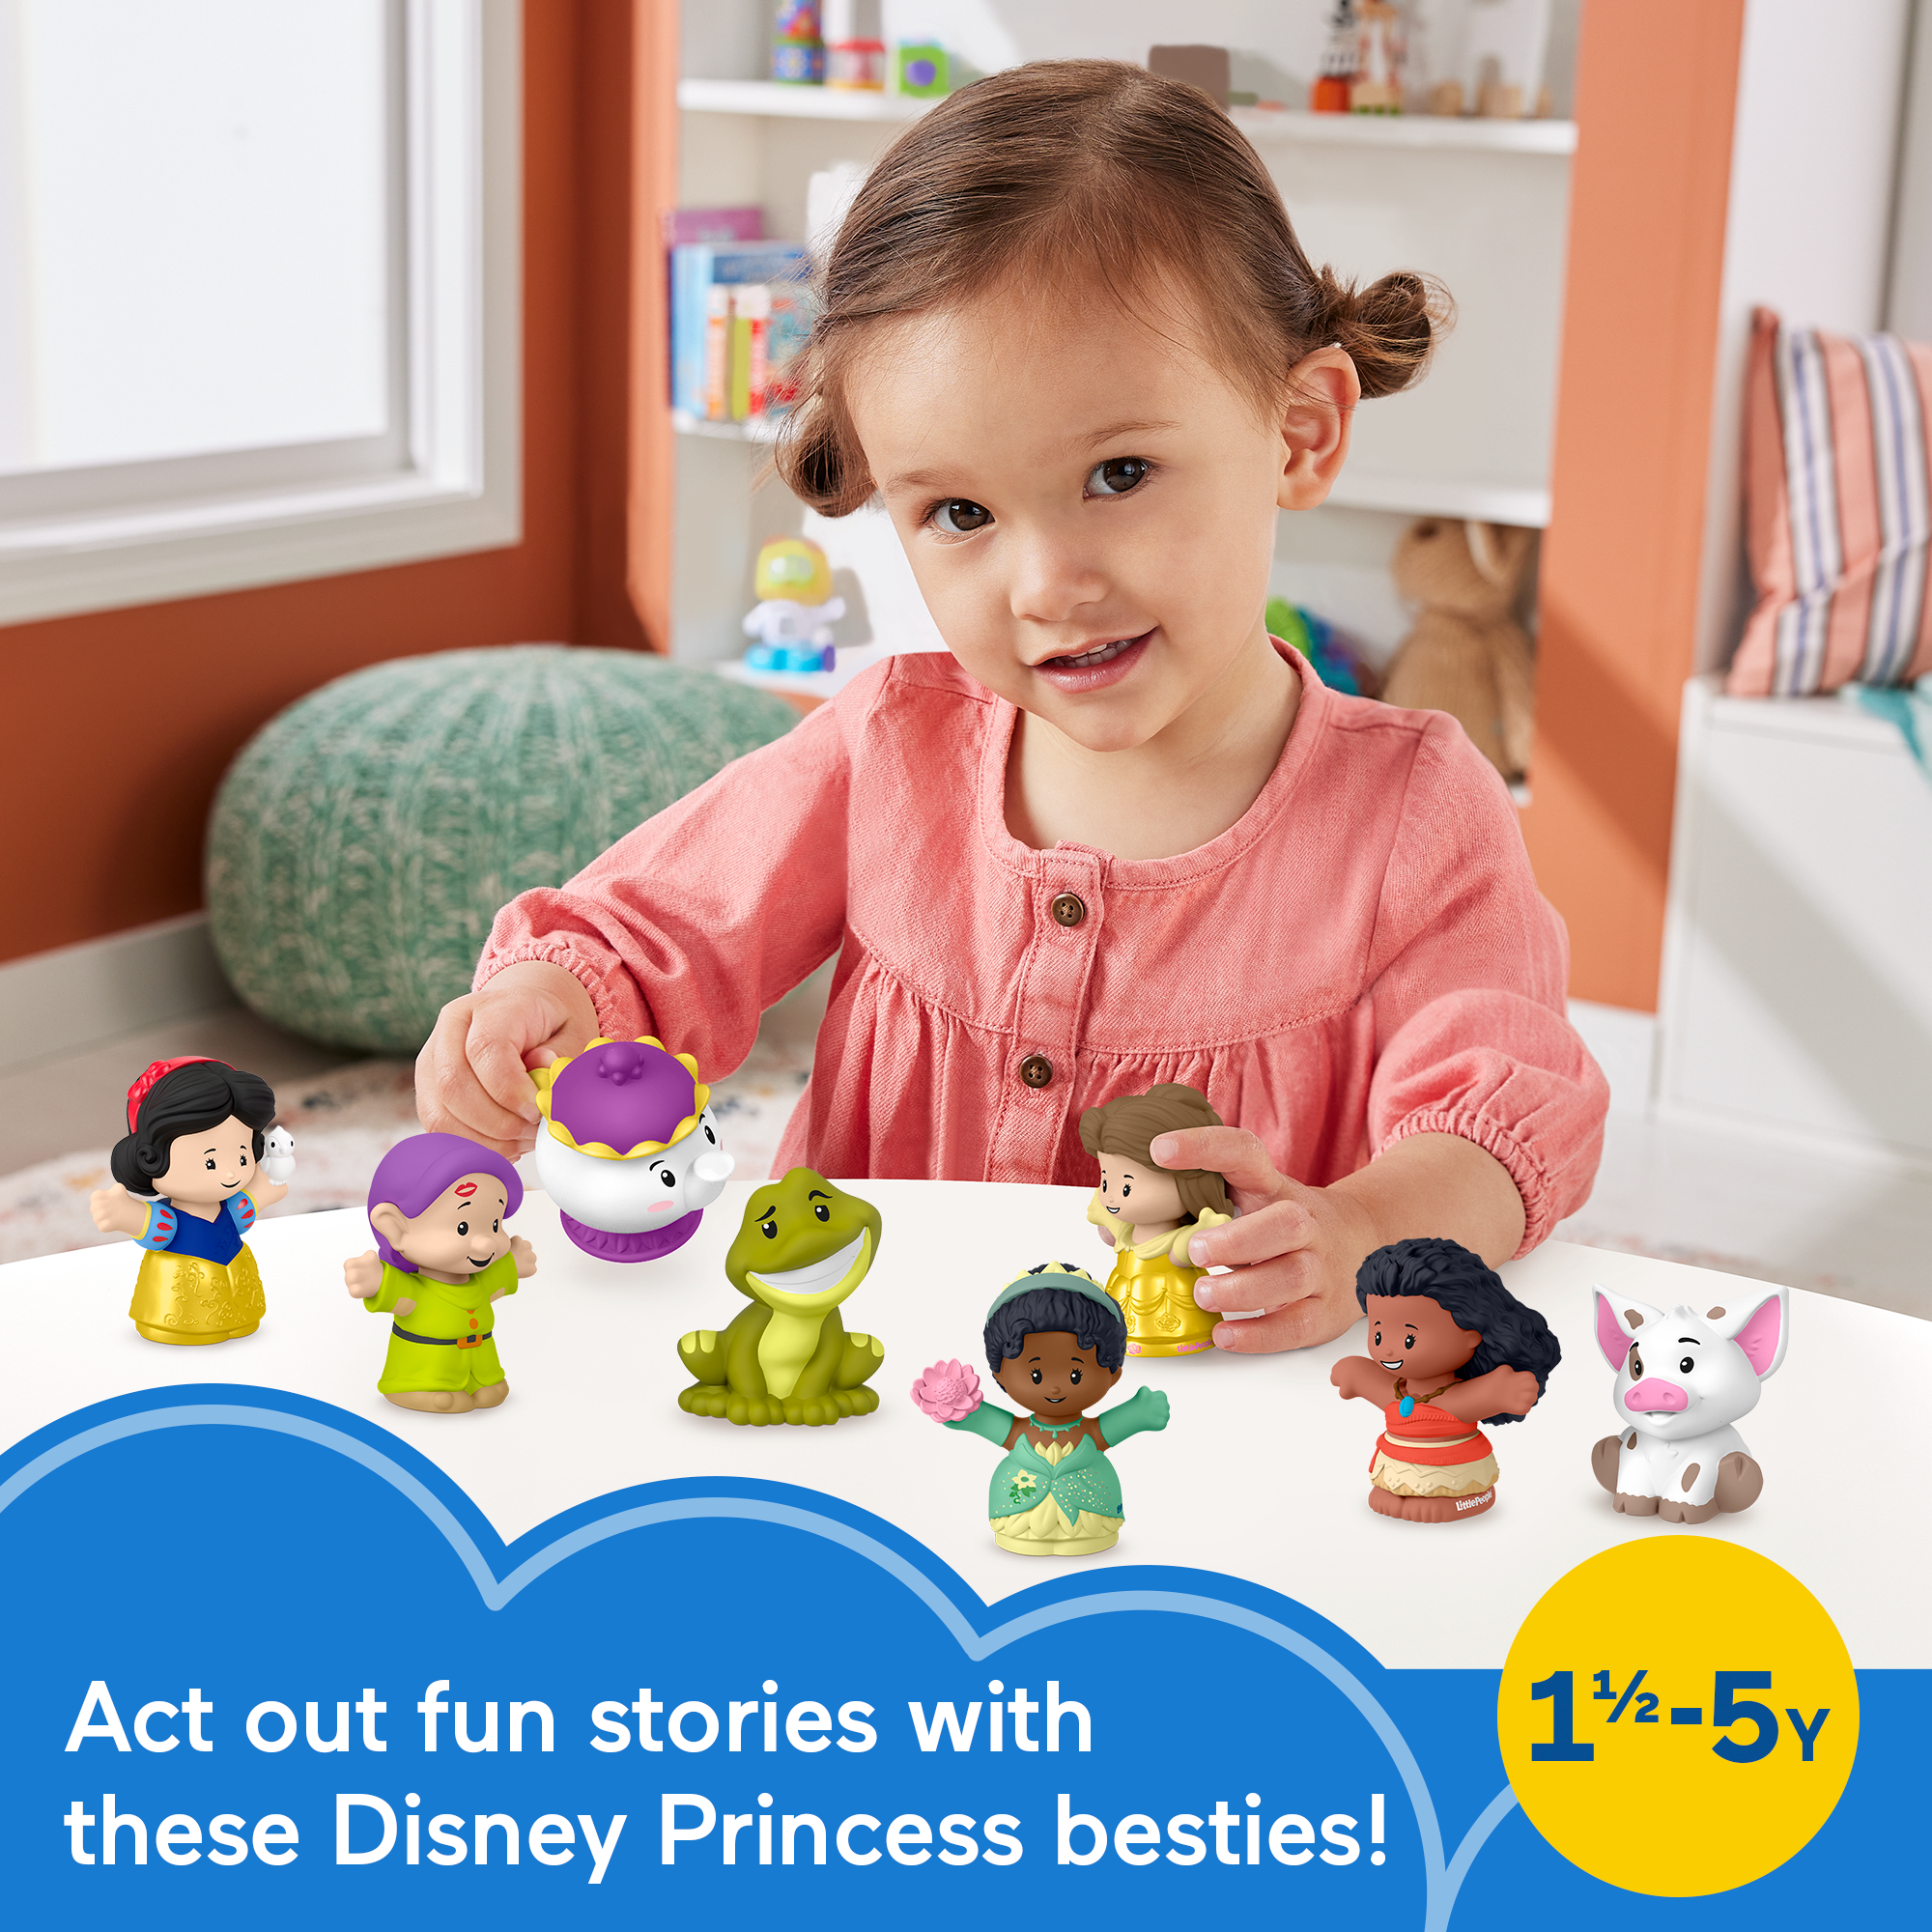 Disney Princess Story Duos Figure Pack by Little People®